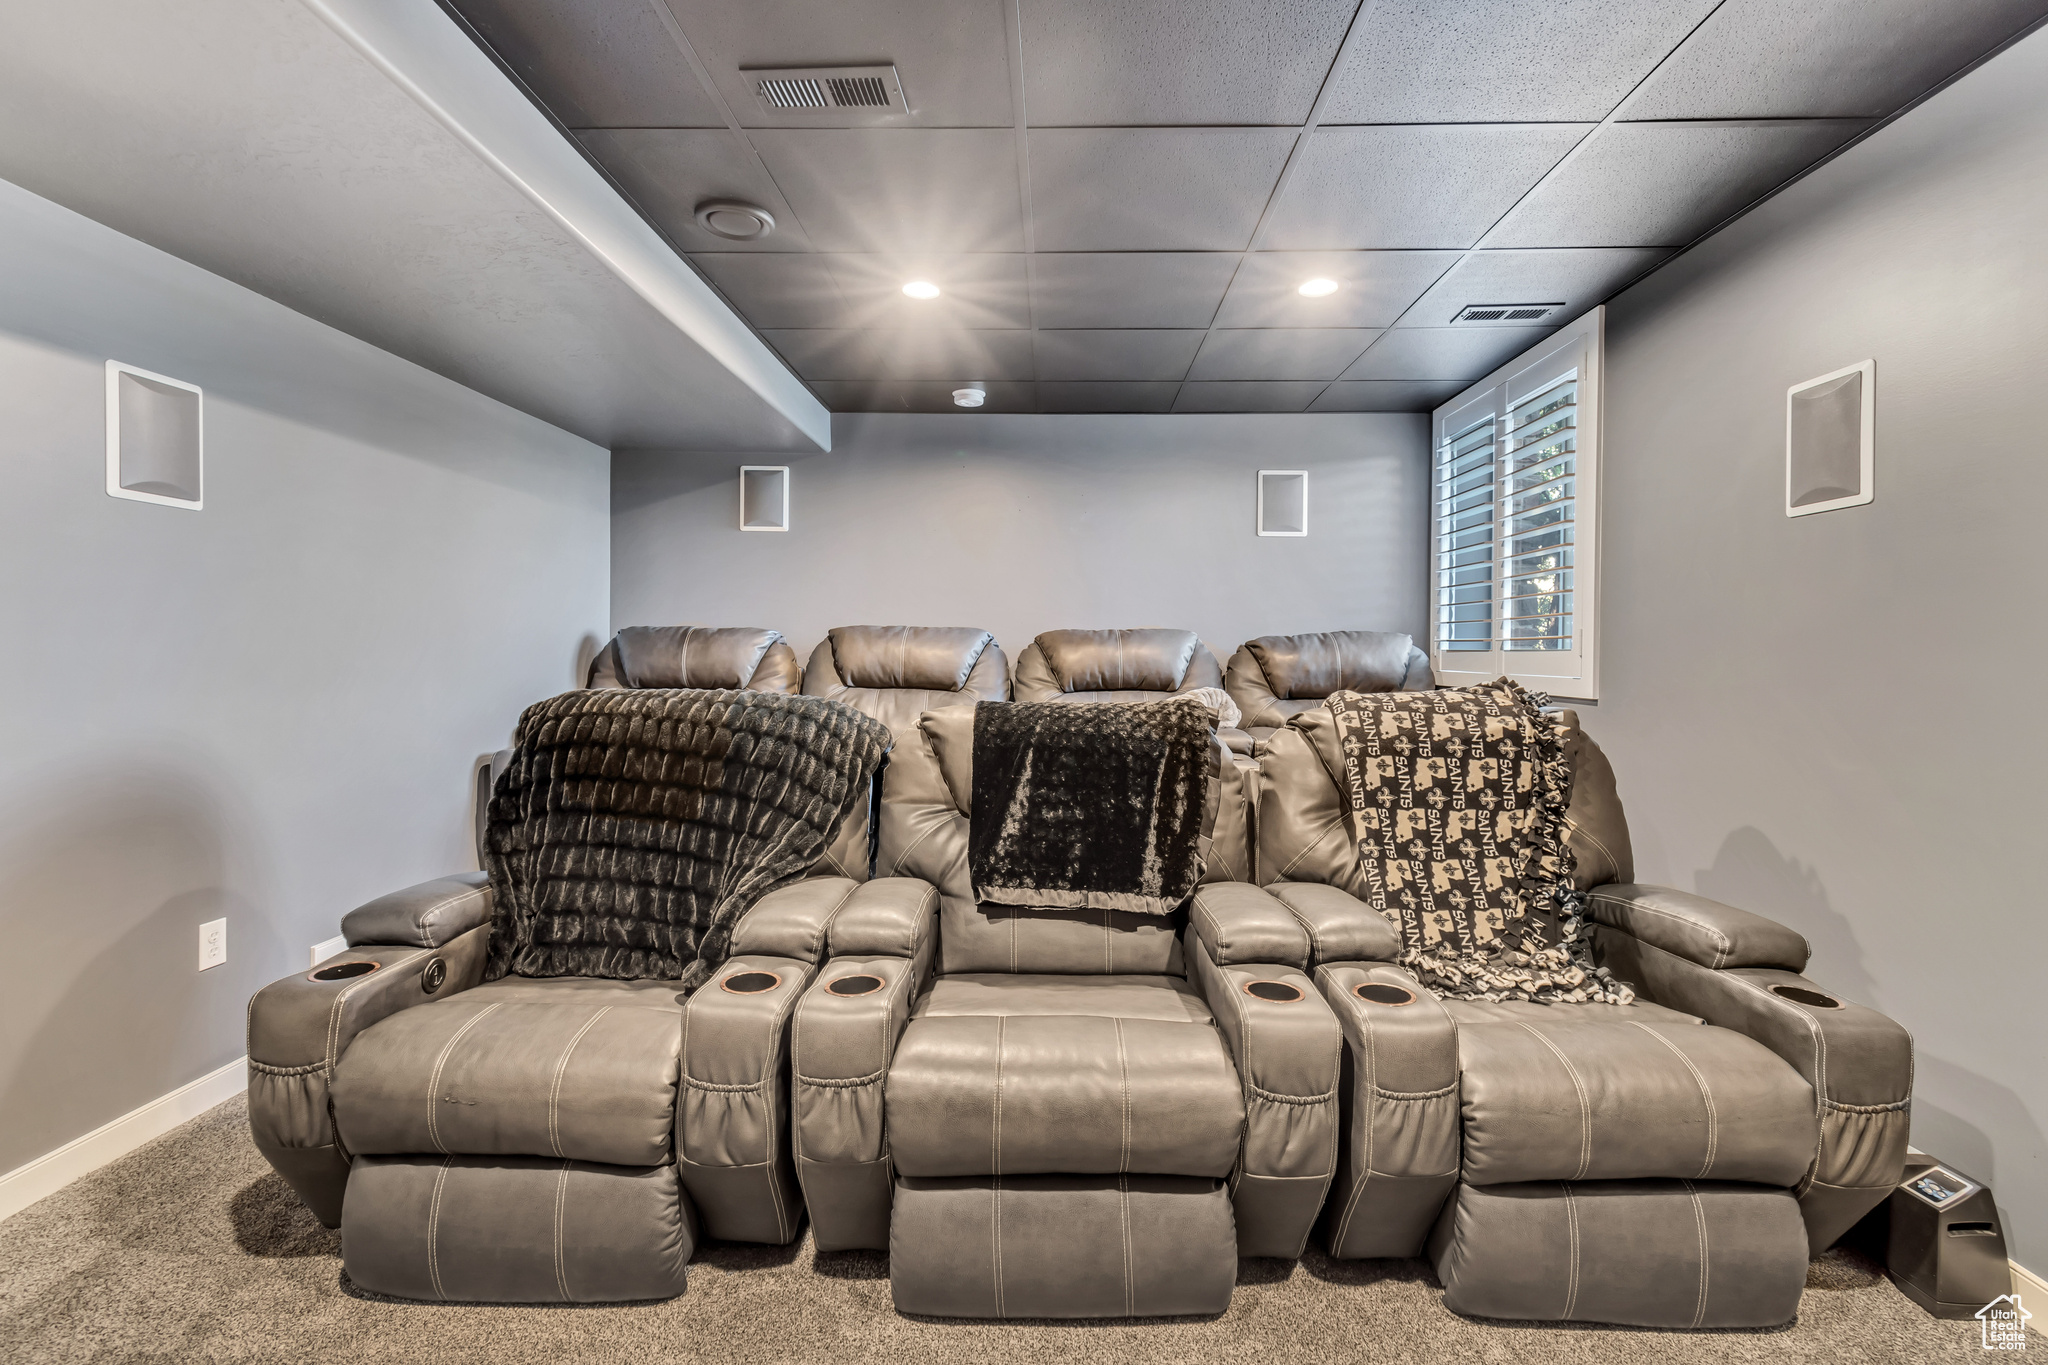 Cinema/Theatre room with raised seating, carpet floors, paneled ceiling, and built-in speakers